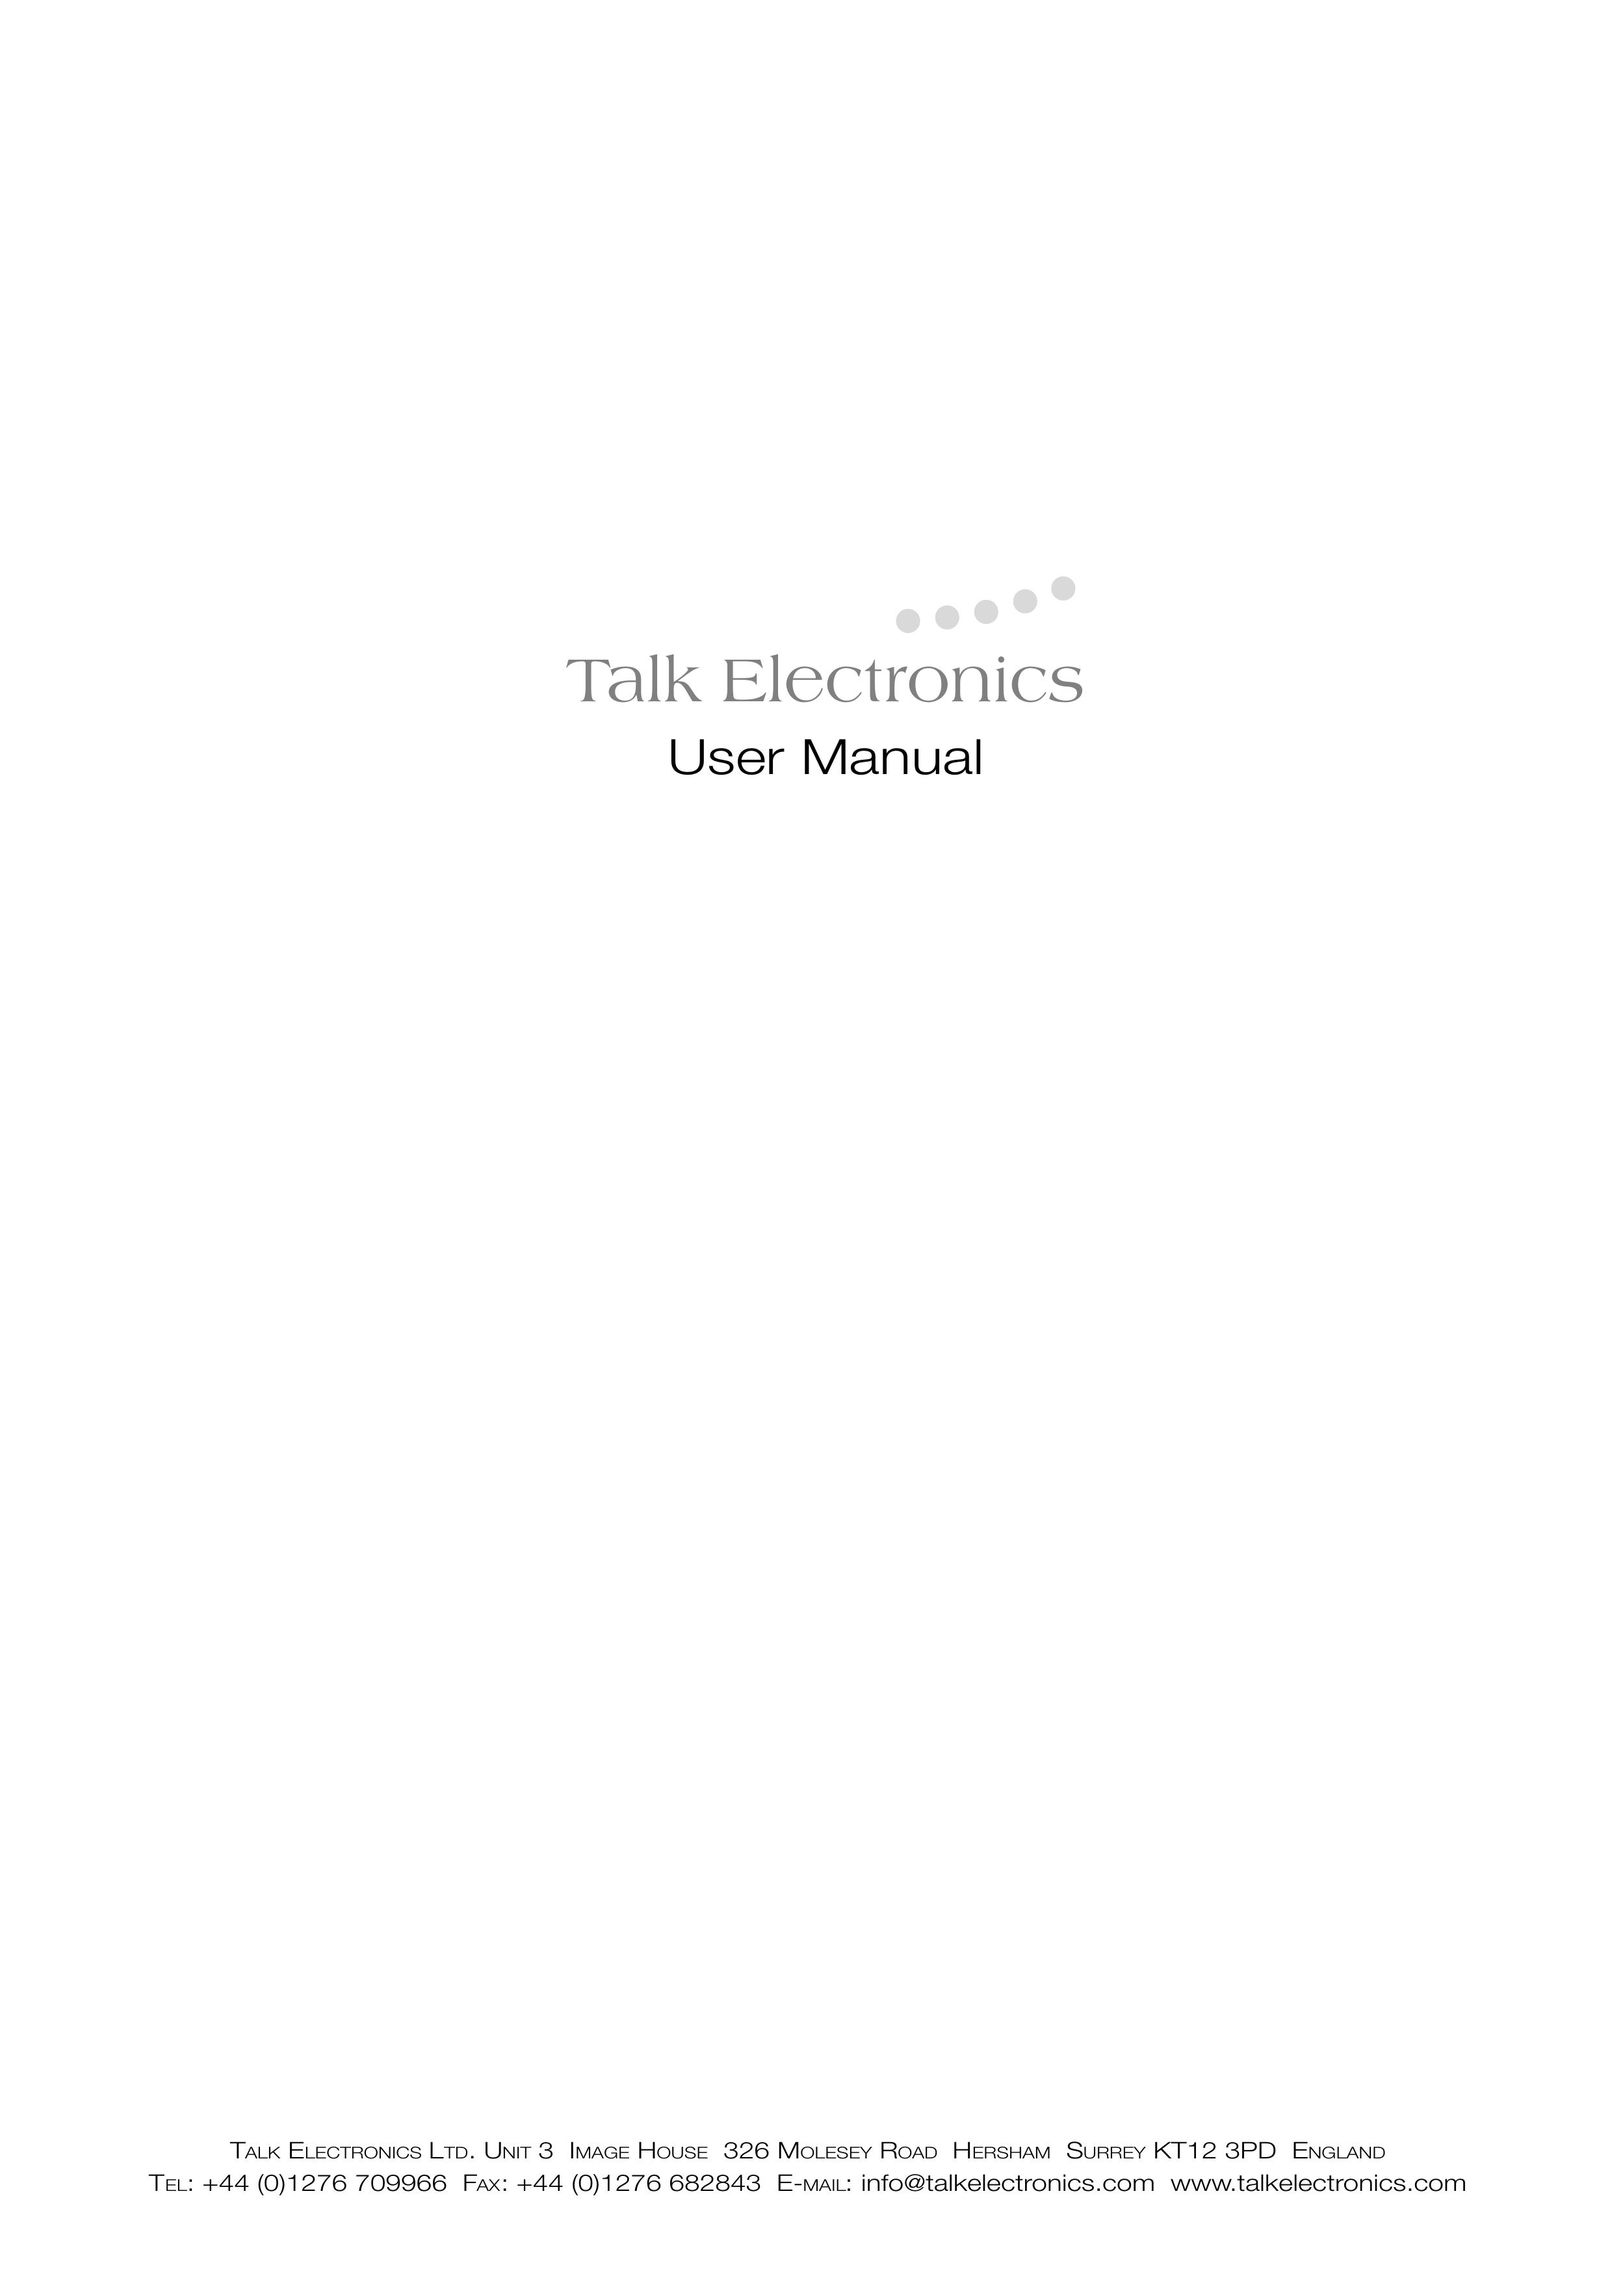 Talk electronic Cyclone Stereo Amplifier User Manual